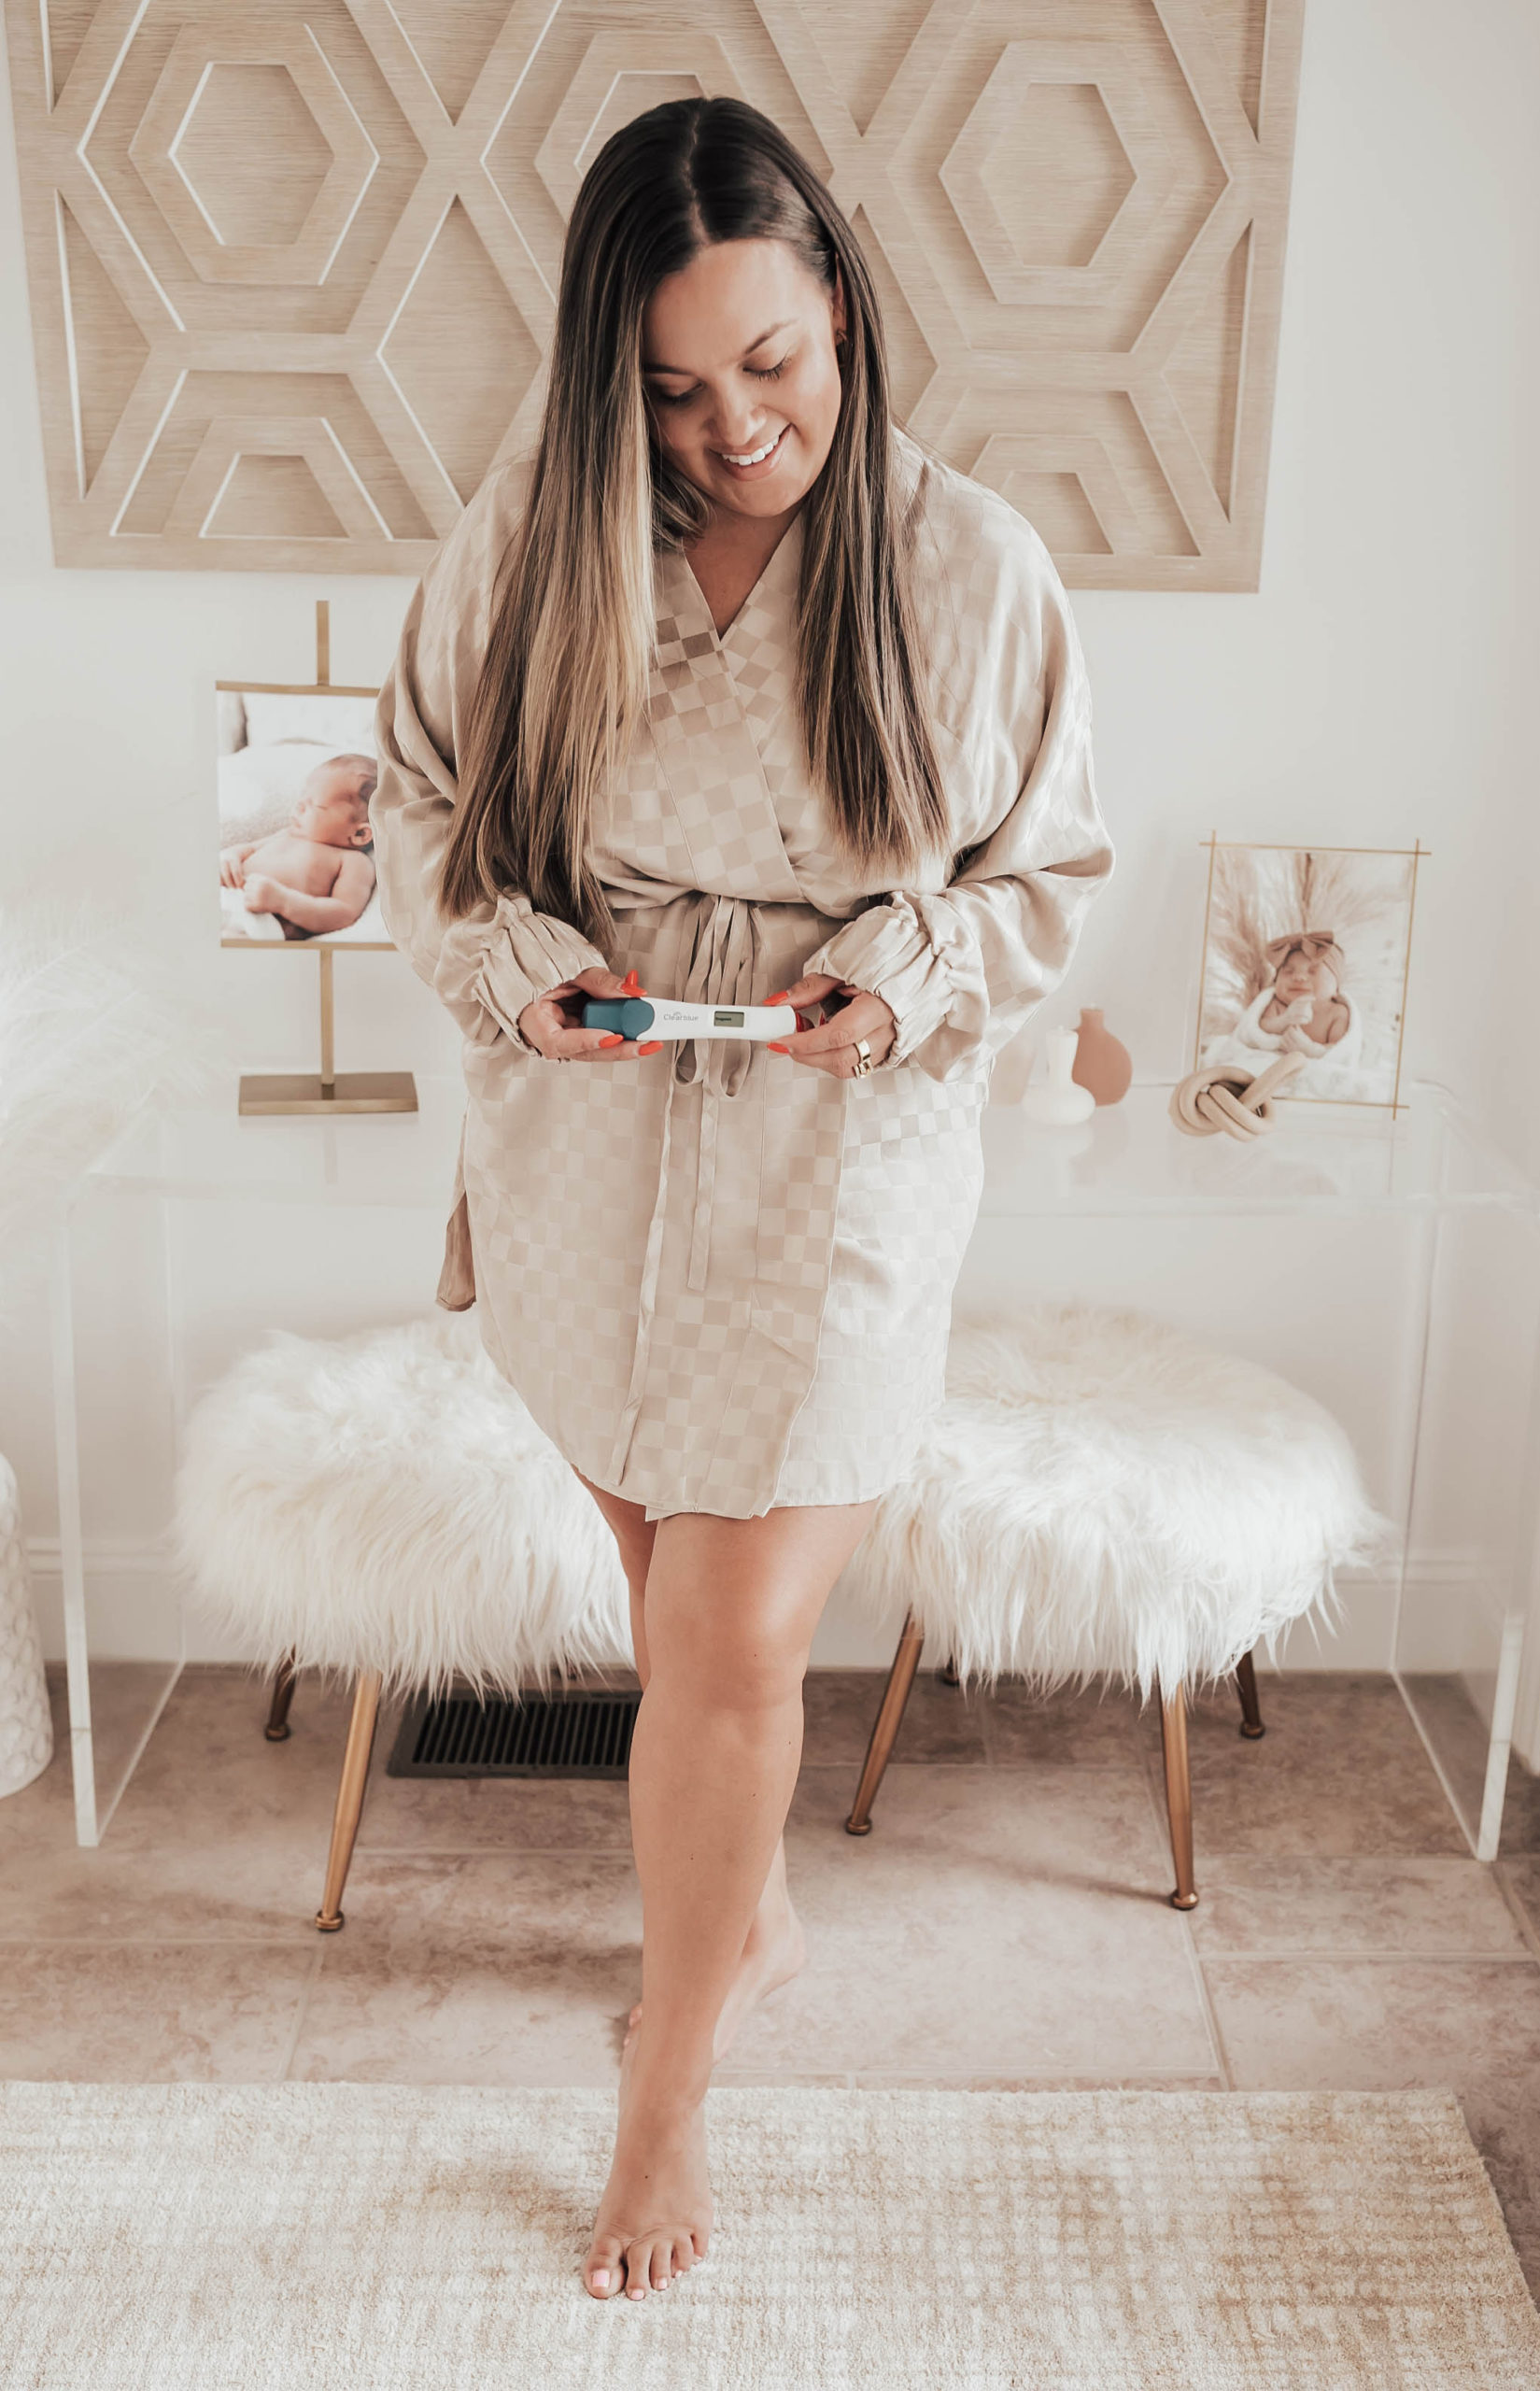 Reno blogger, Ashley Zeal Hurd, from The Ashley and Emily blog shares her first trimester favorites with baby number three!